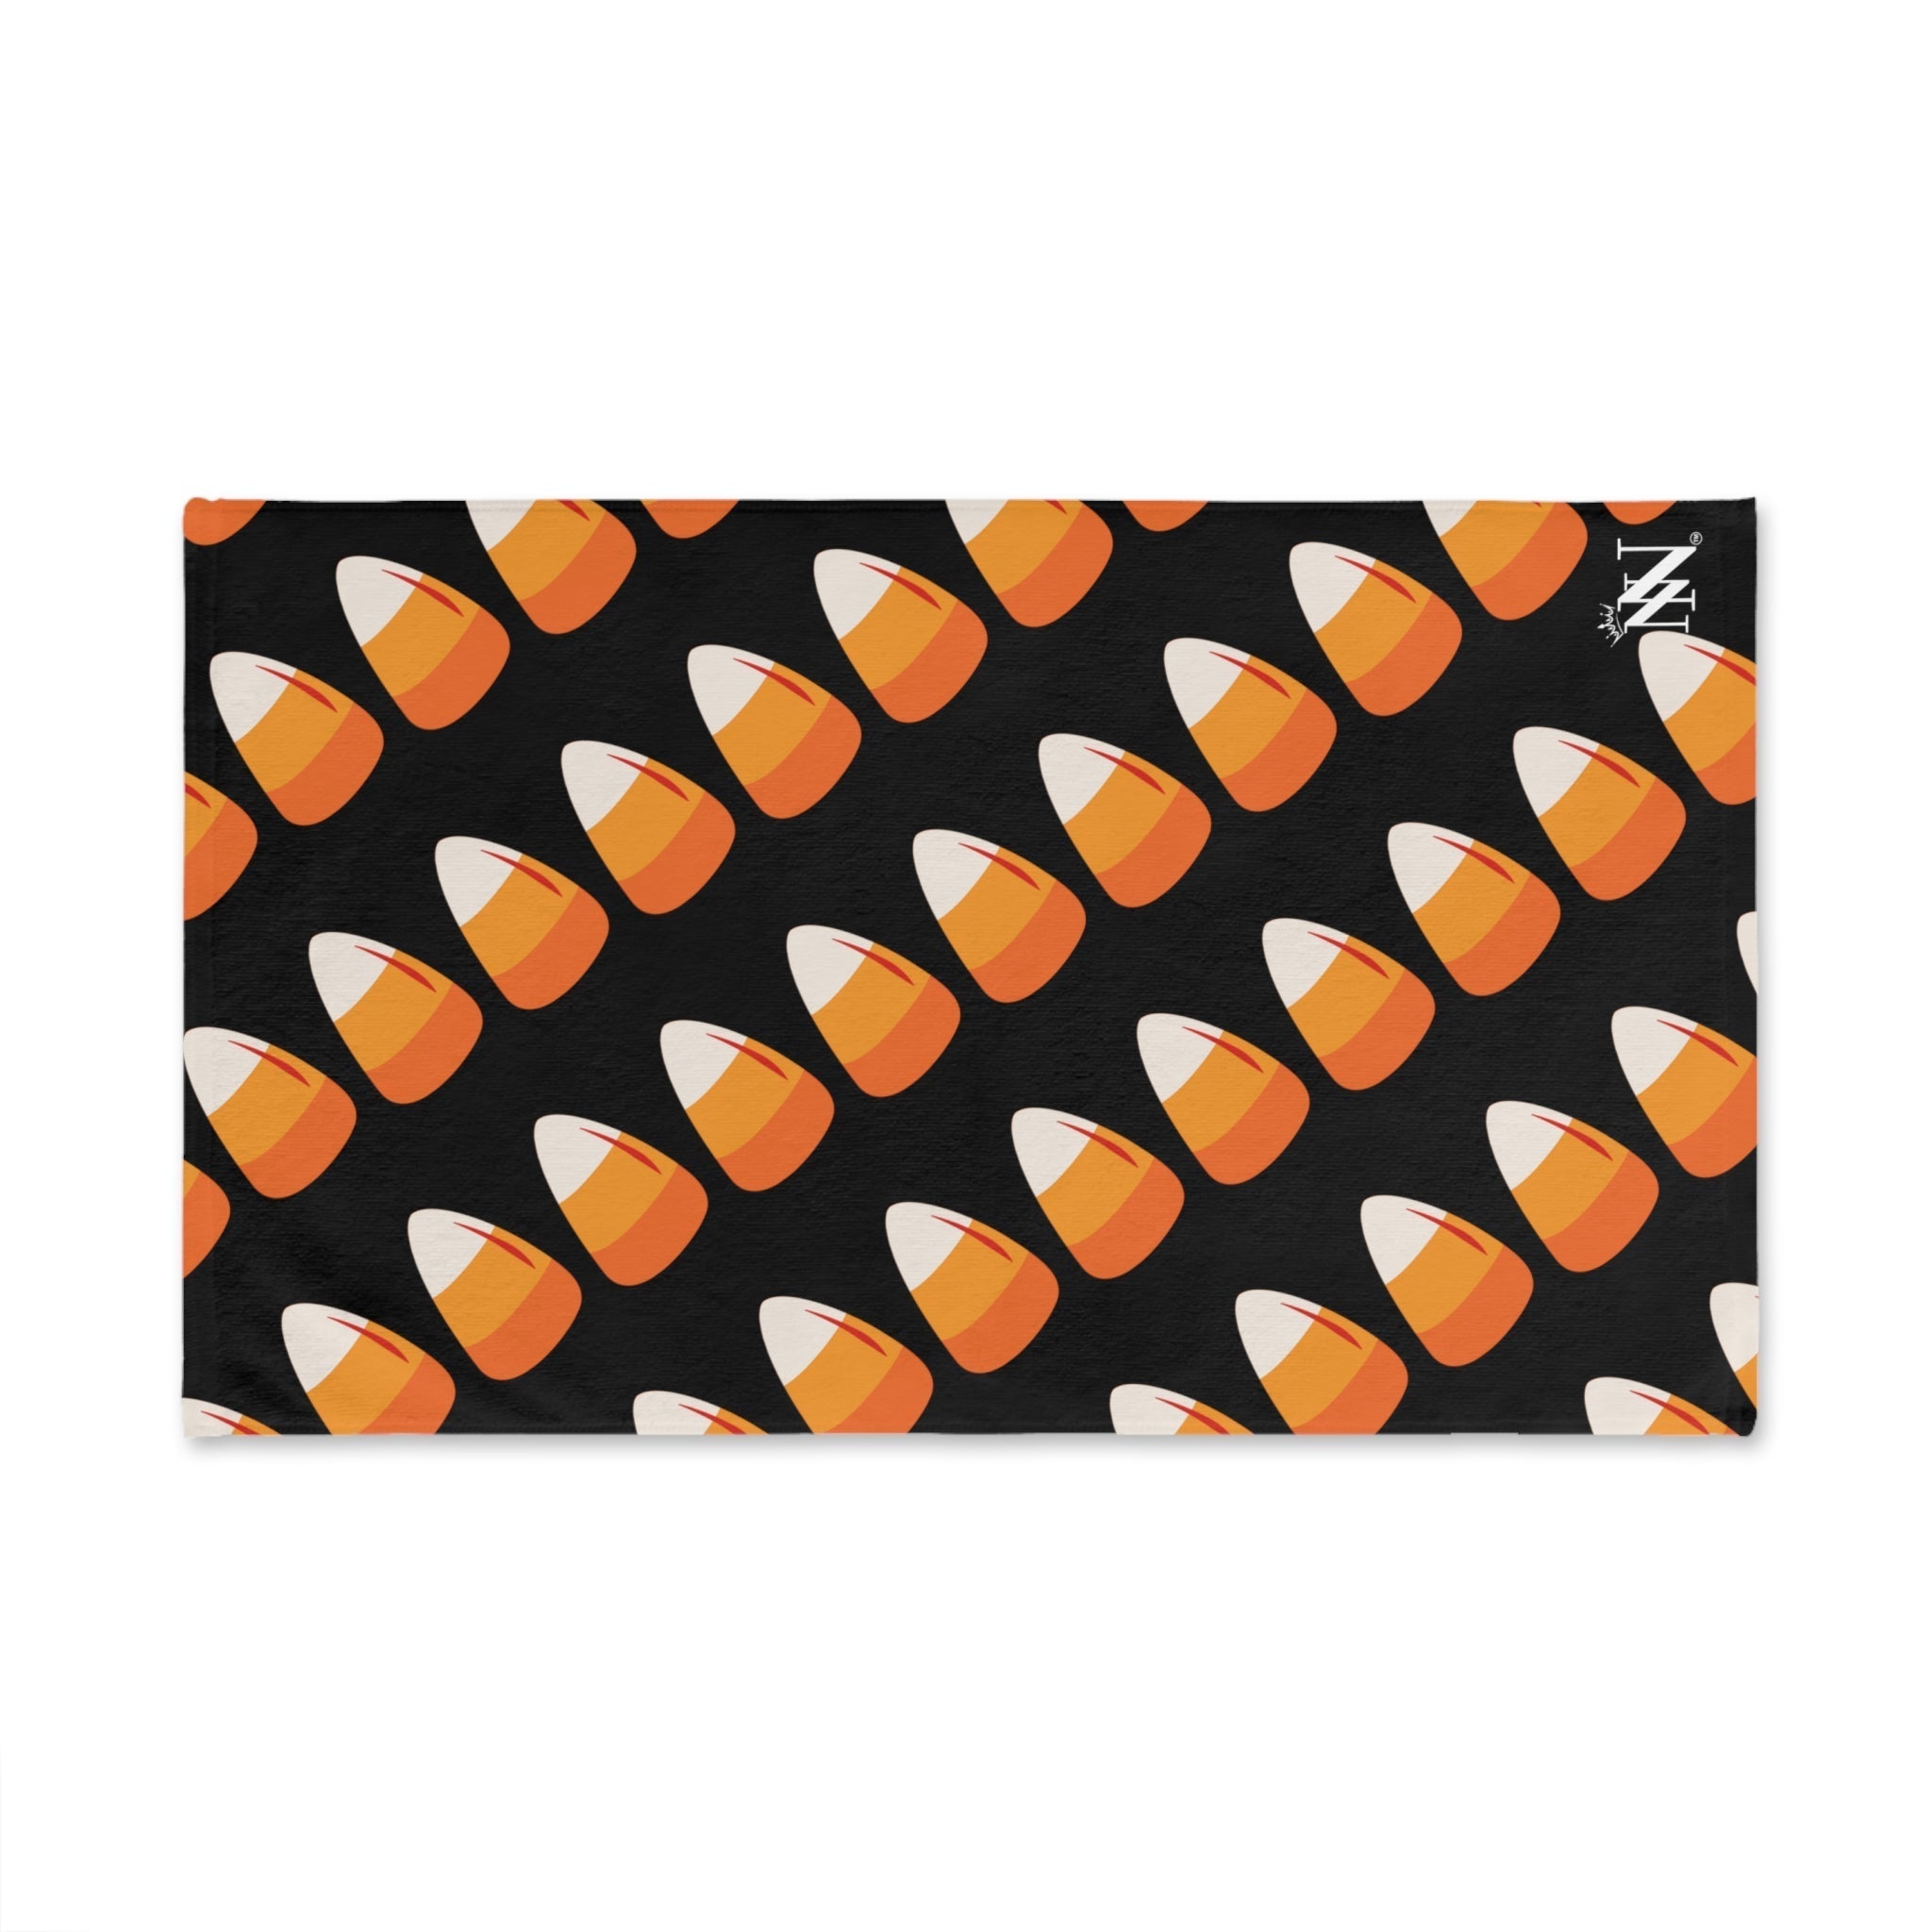 Candy Corn Black | Sexy Gifts for Boyfriend, Funny Towel Romantic Gift for Wedding Couple Fiance First Year 2nd Anniversary Valentines, Party Gag Gifts, Joke Humor Cloth for Husband Men BF NECTAR NAPKINS